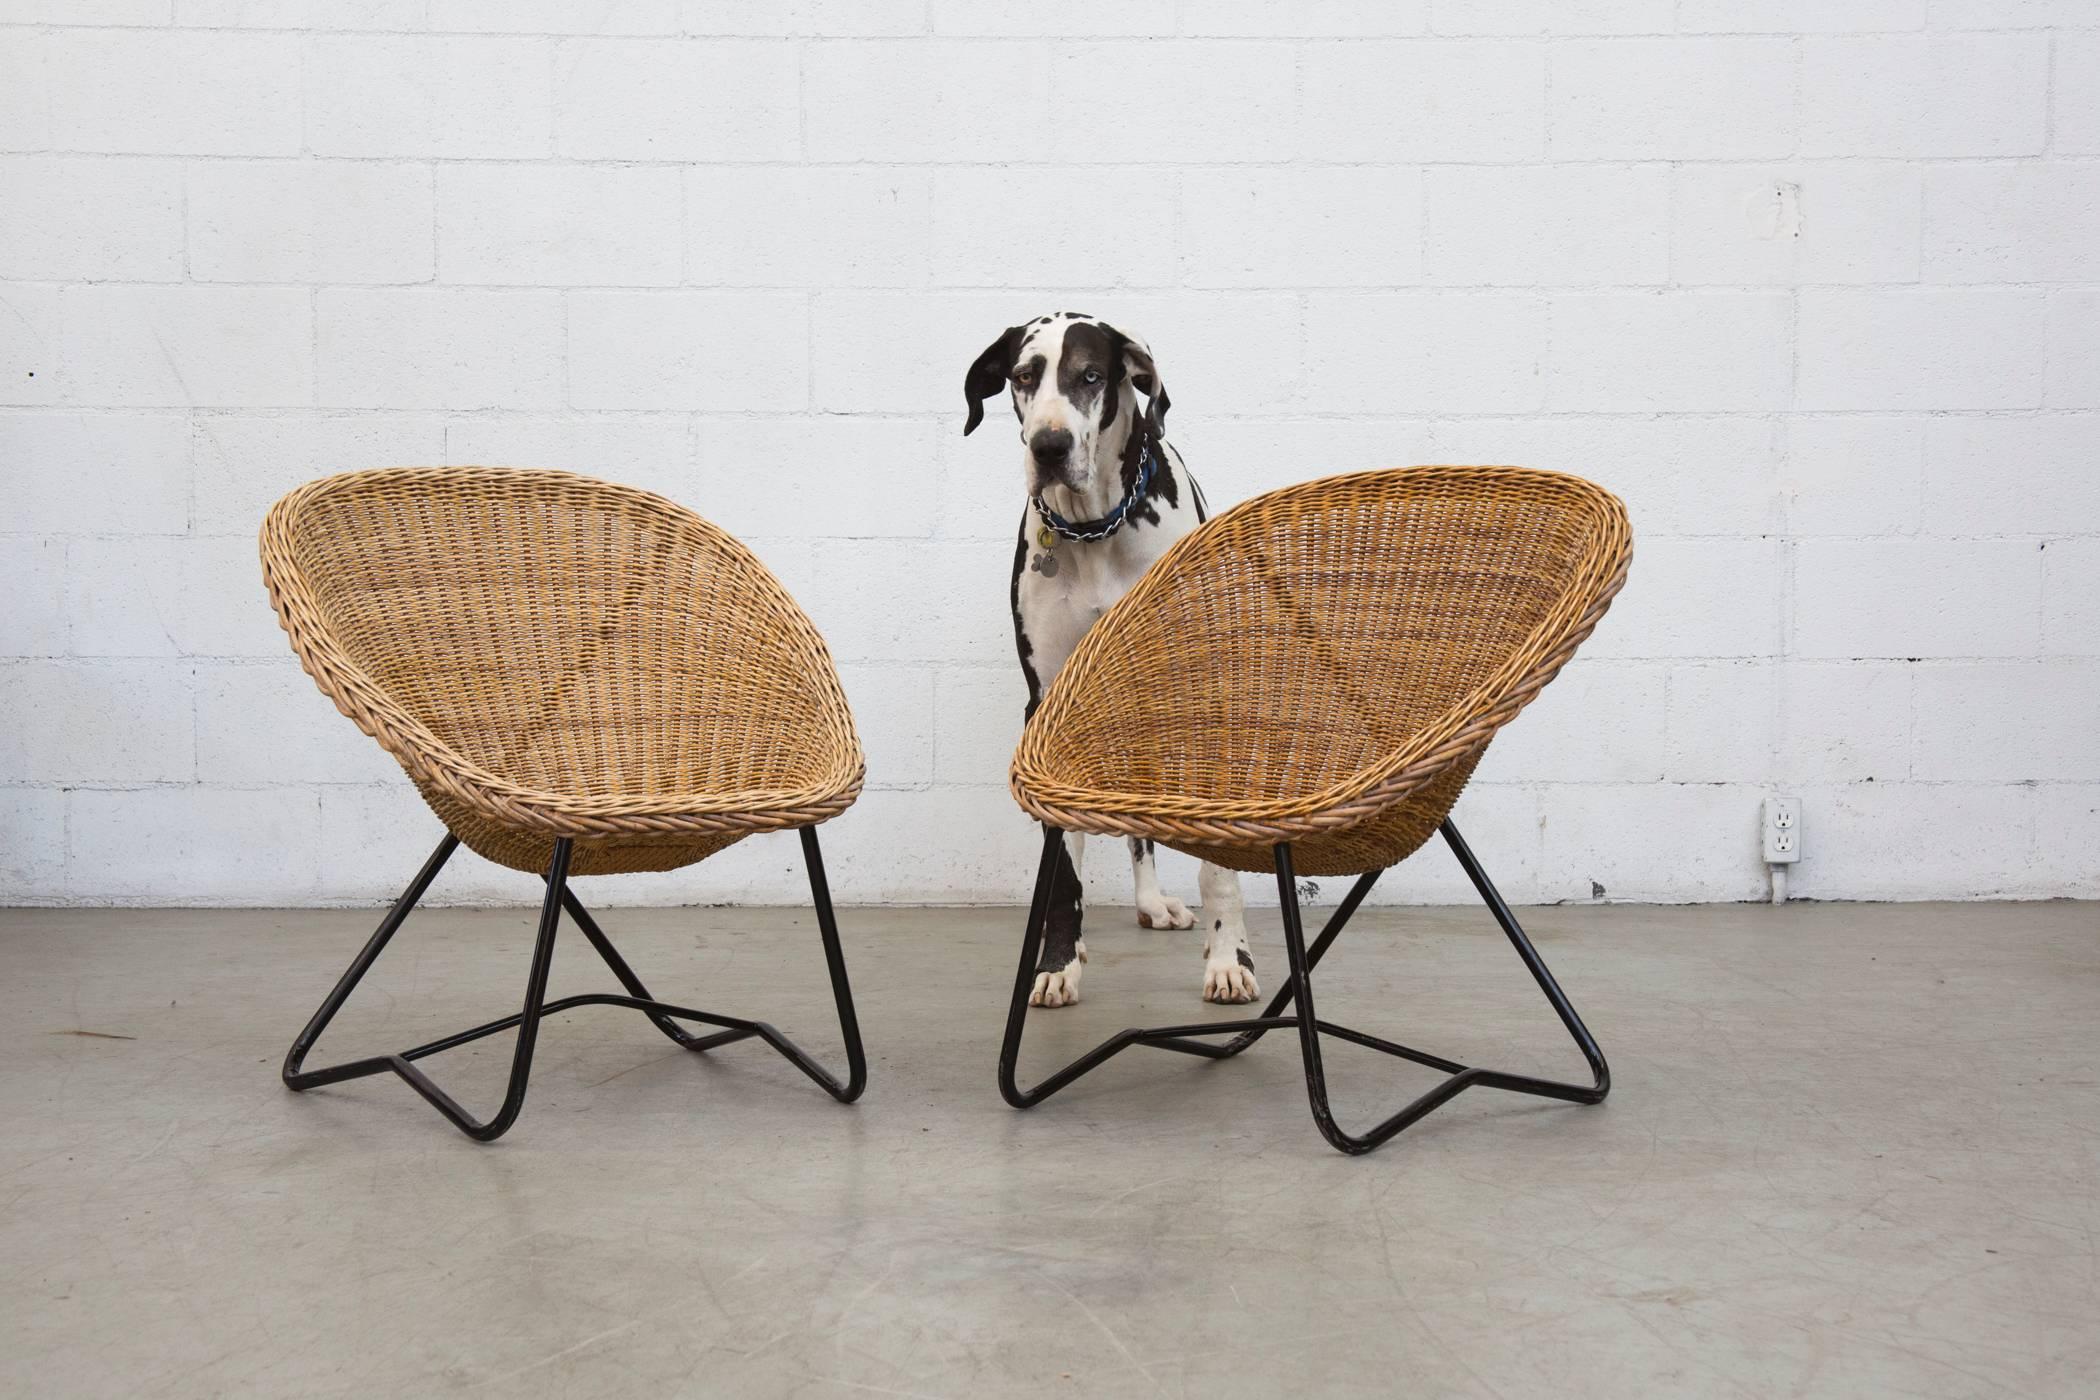 Gorgeous woven bowl chairs with black enameled cross frame. Very good original condition. One slightly darker patina than the other. Outstanding design. Visible wear to the frame, minimal breakage on wicker, not enough to detract from design or